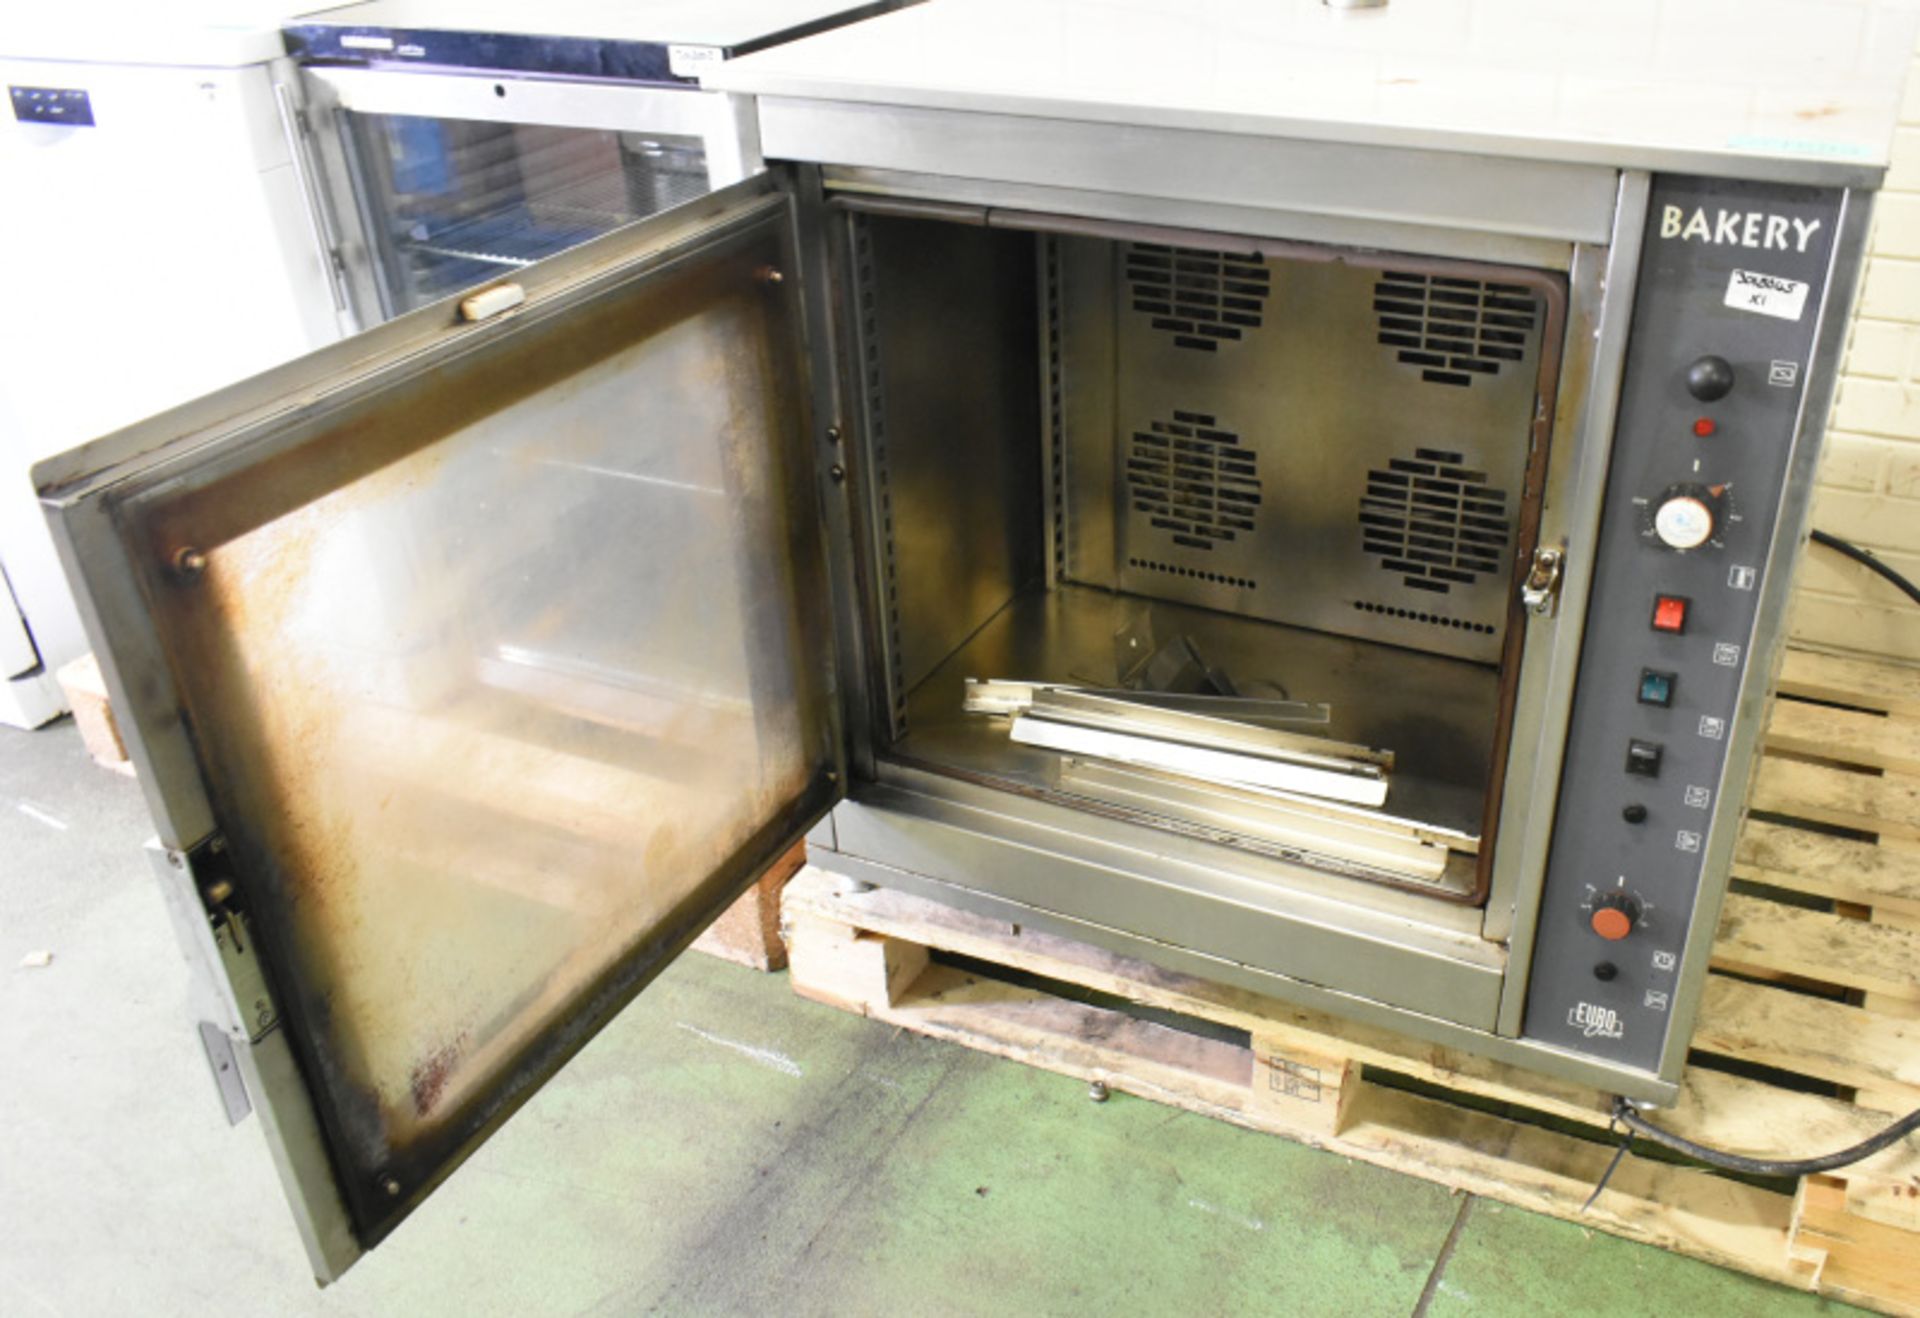 Euro bakery oven L 91 x W 73 x H 87cm - Image 2 of 6